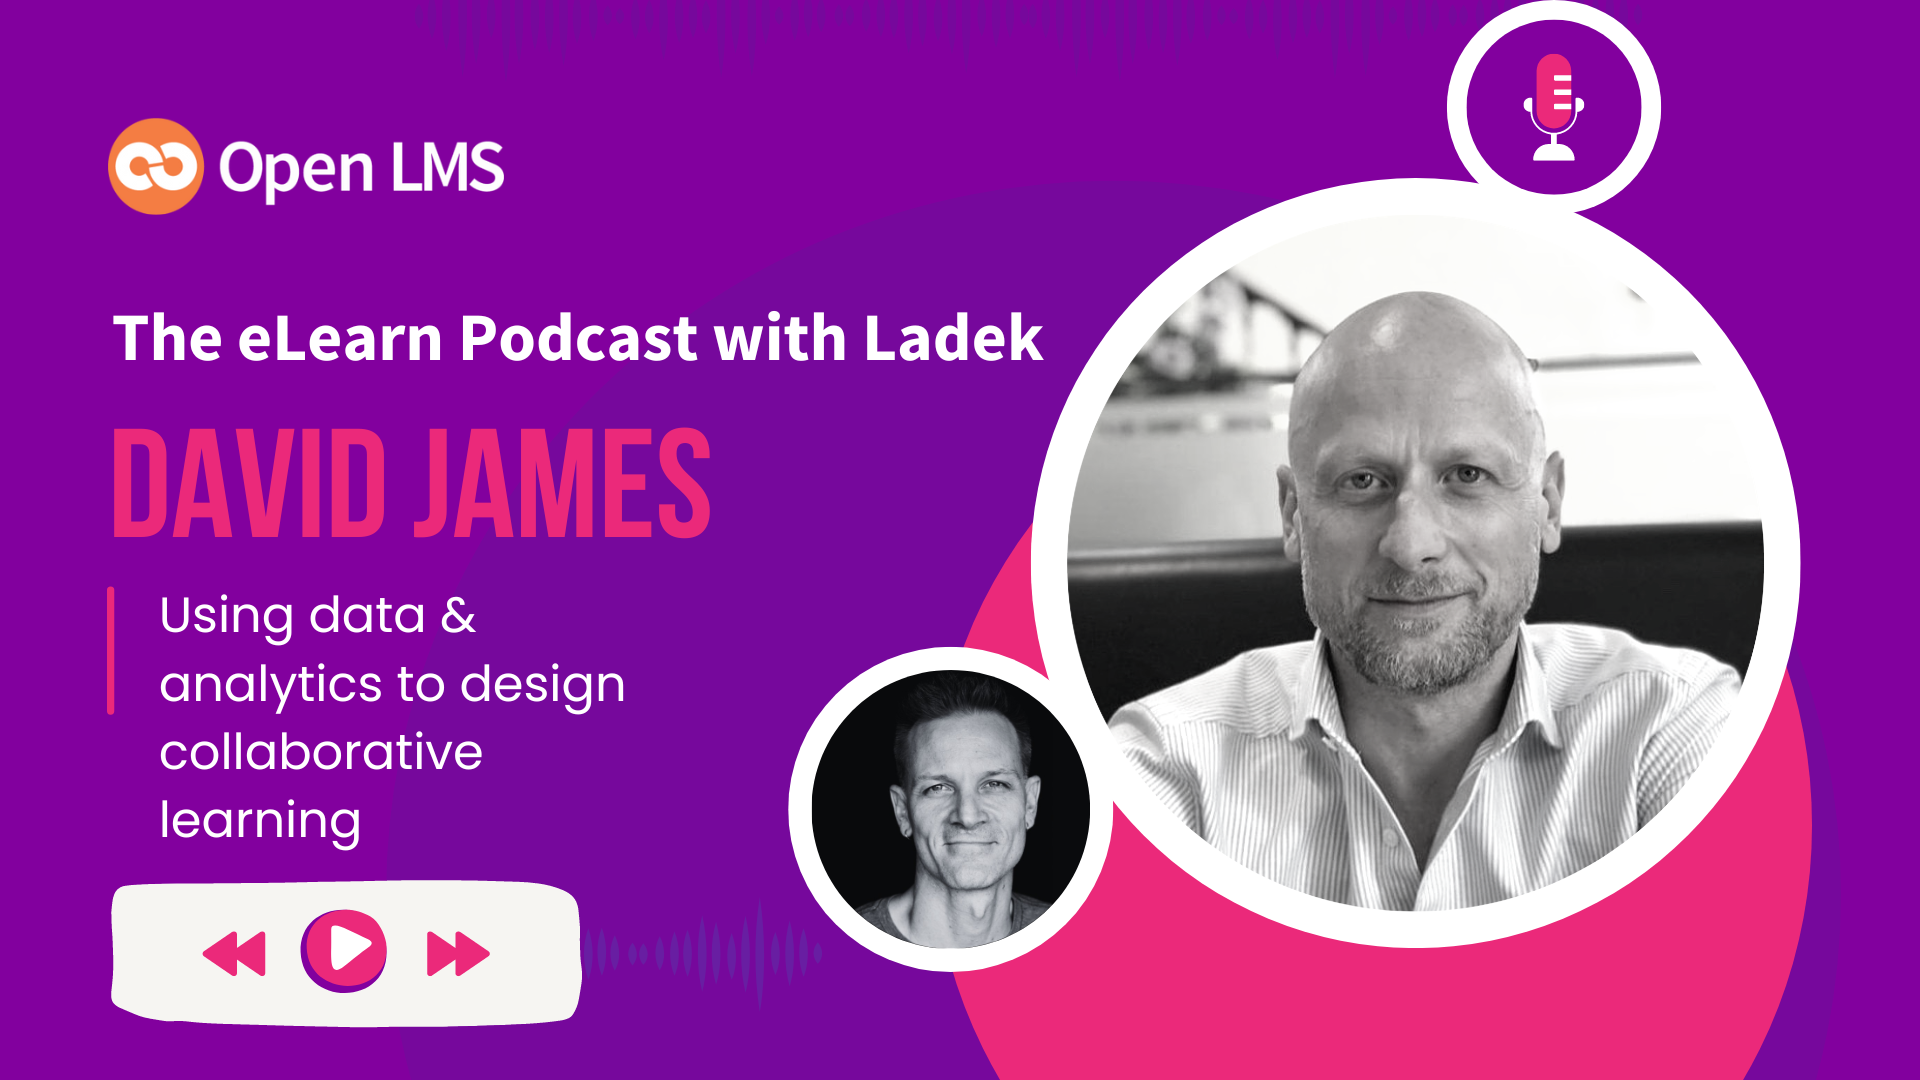 David James Wants To Tell You A Couple Truths About Learning & Development on the eLearn Podcast